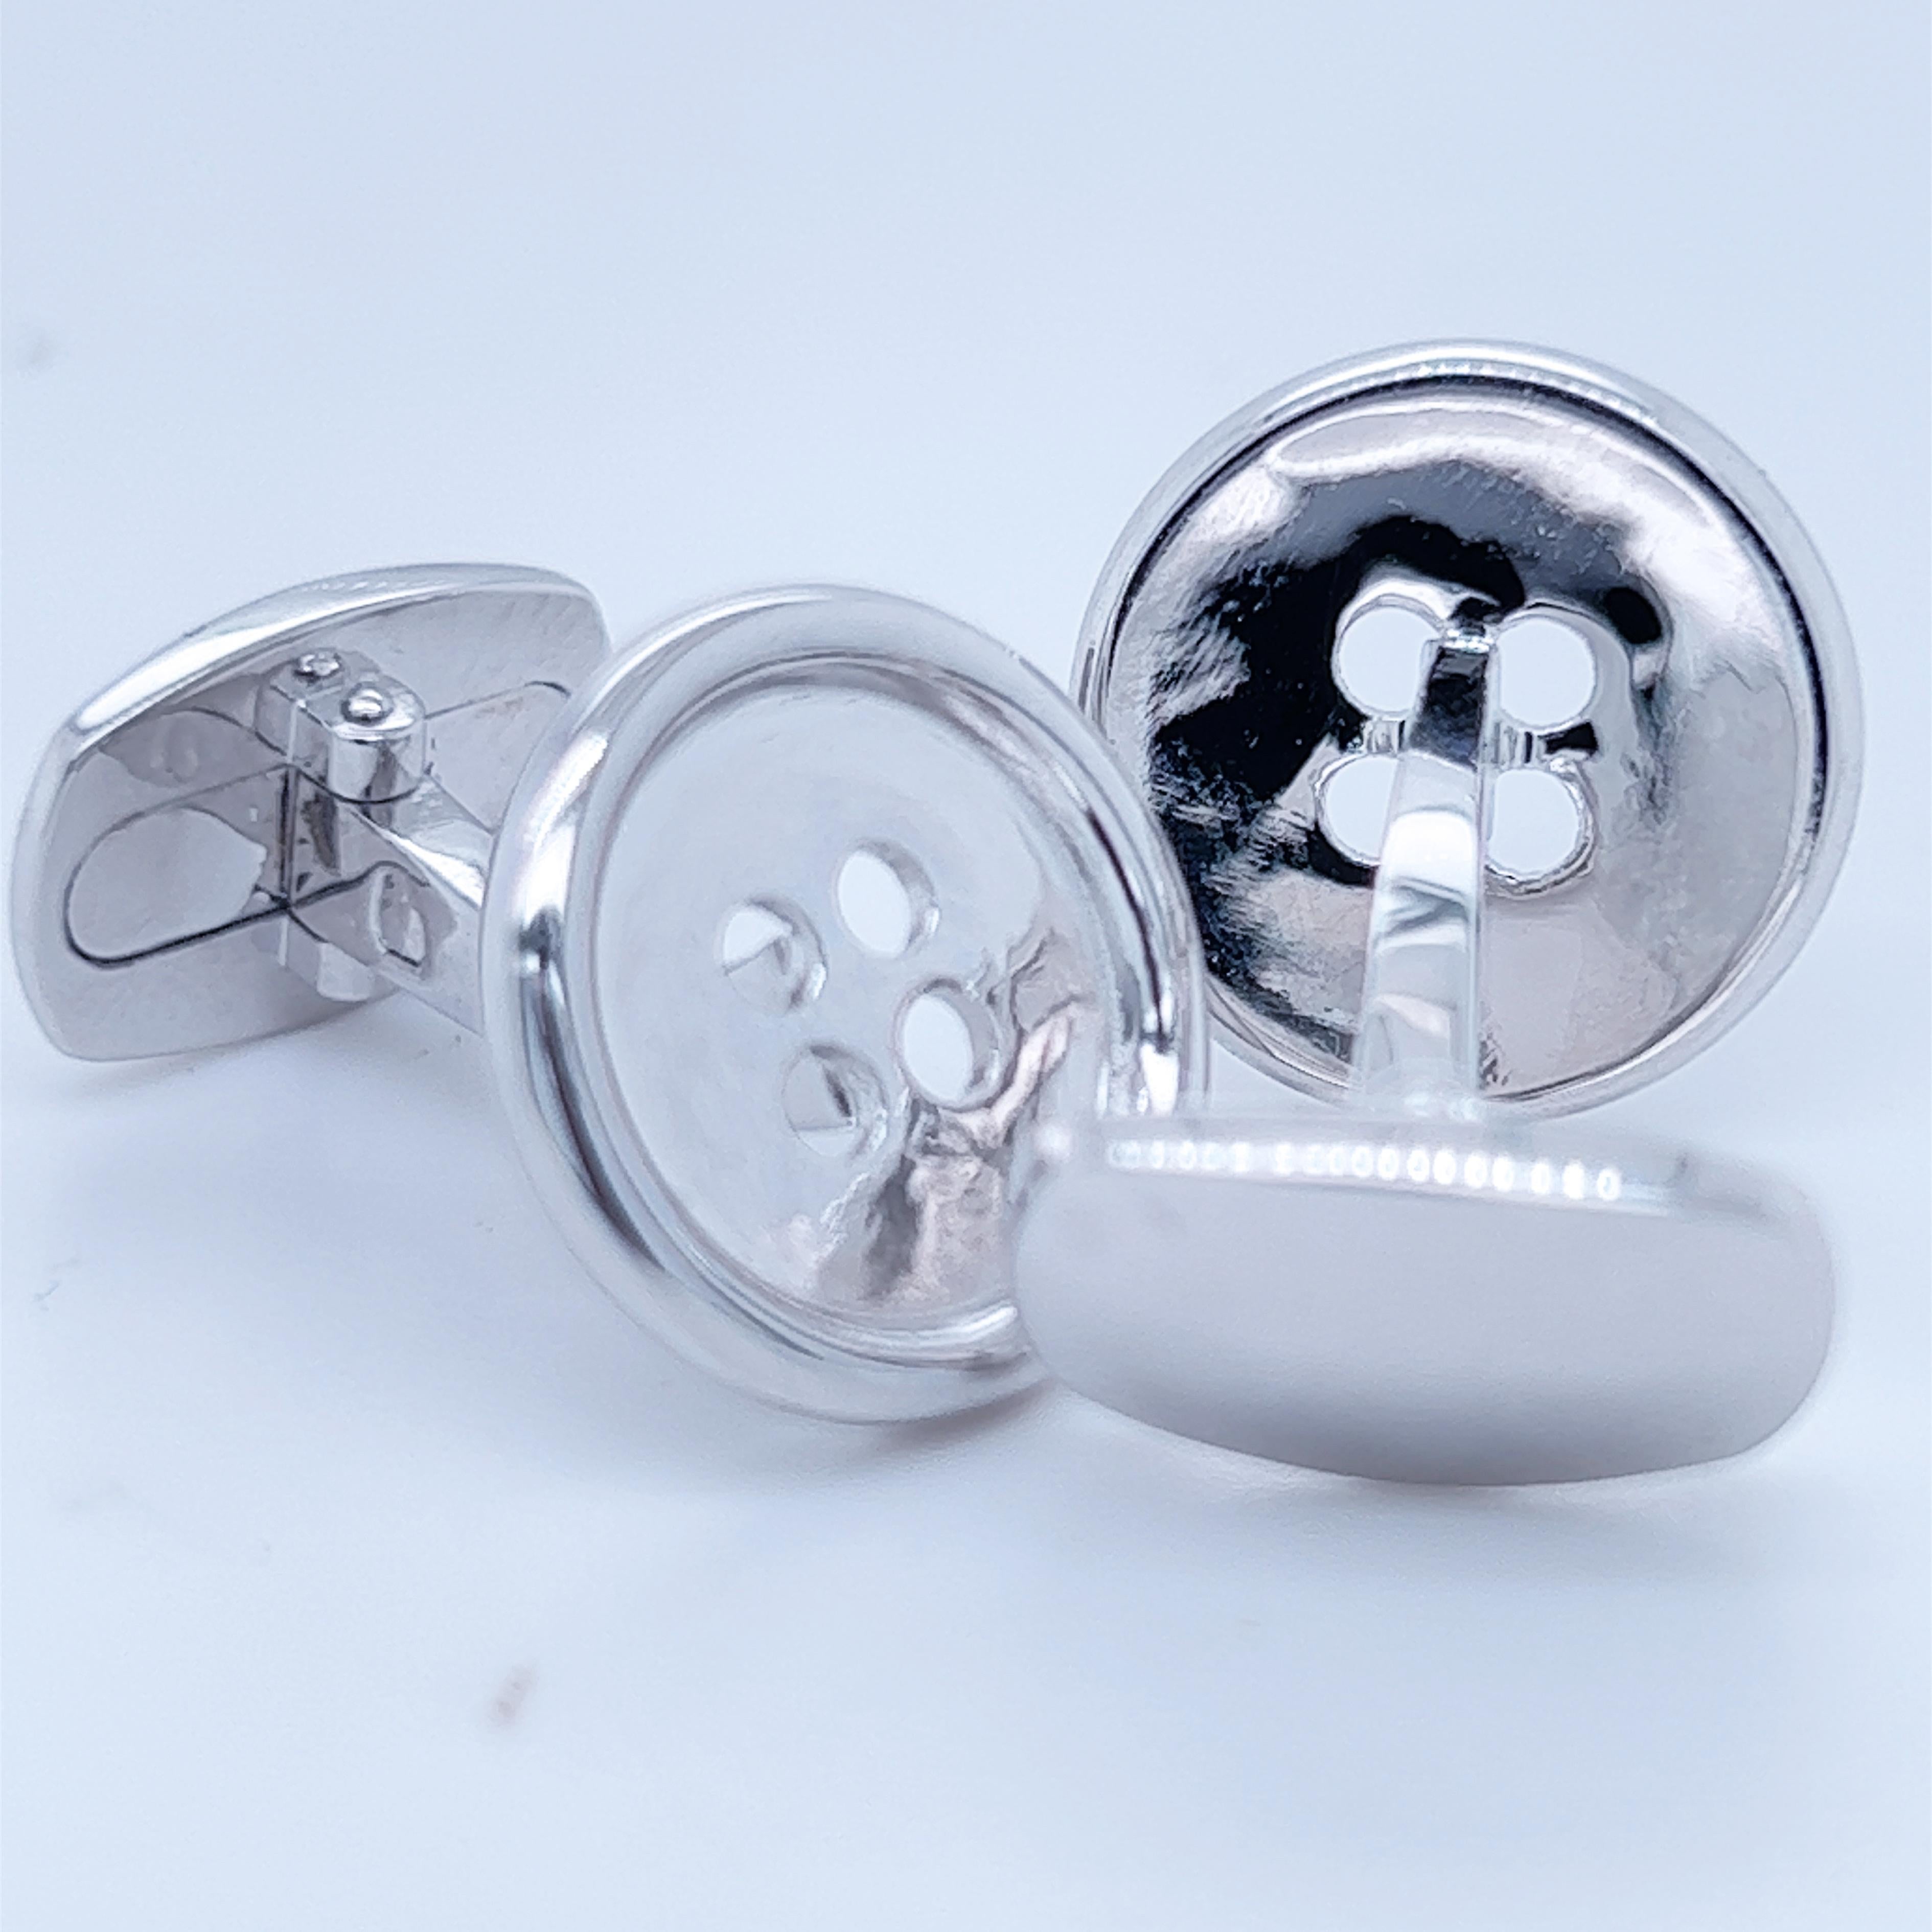 Smart, chic yet Timeless Solid Sterling Silver, Mirror Finish Button Shaped Cufflinks.
Delivered to your door beautifully gift wrapped in our fitted smart Whiskey Suede Leather Case  and pouch.